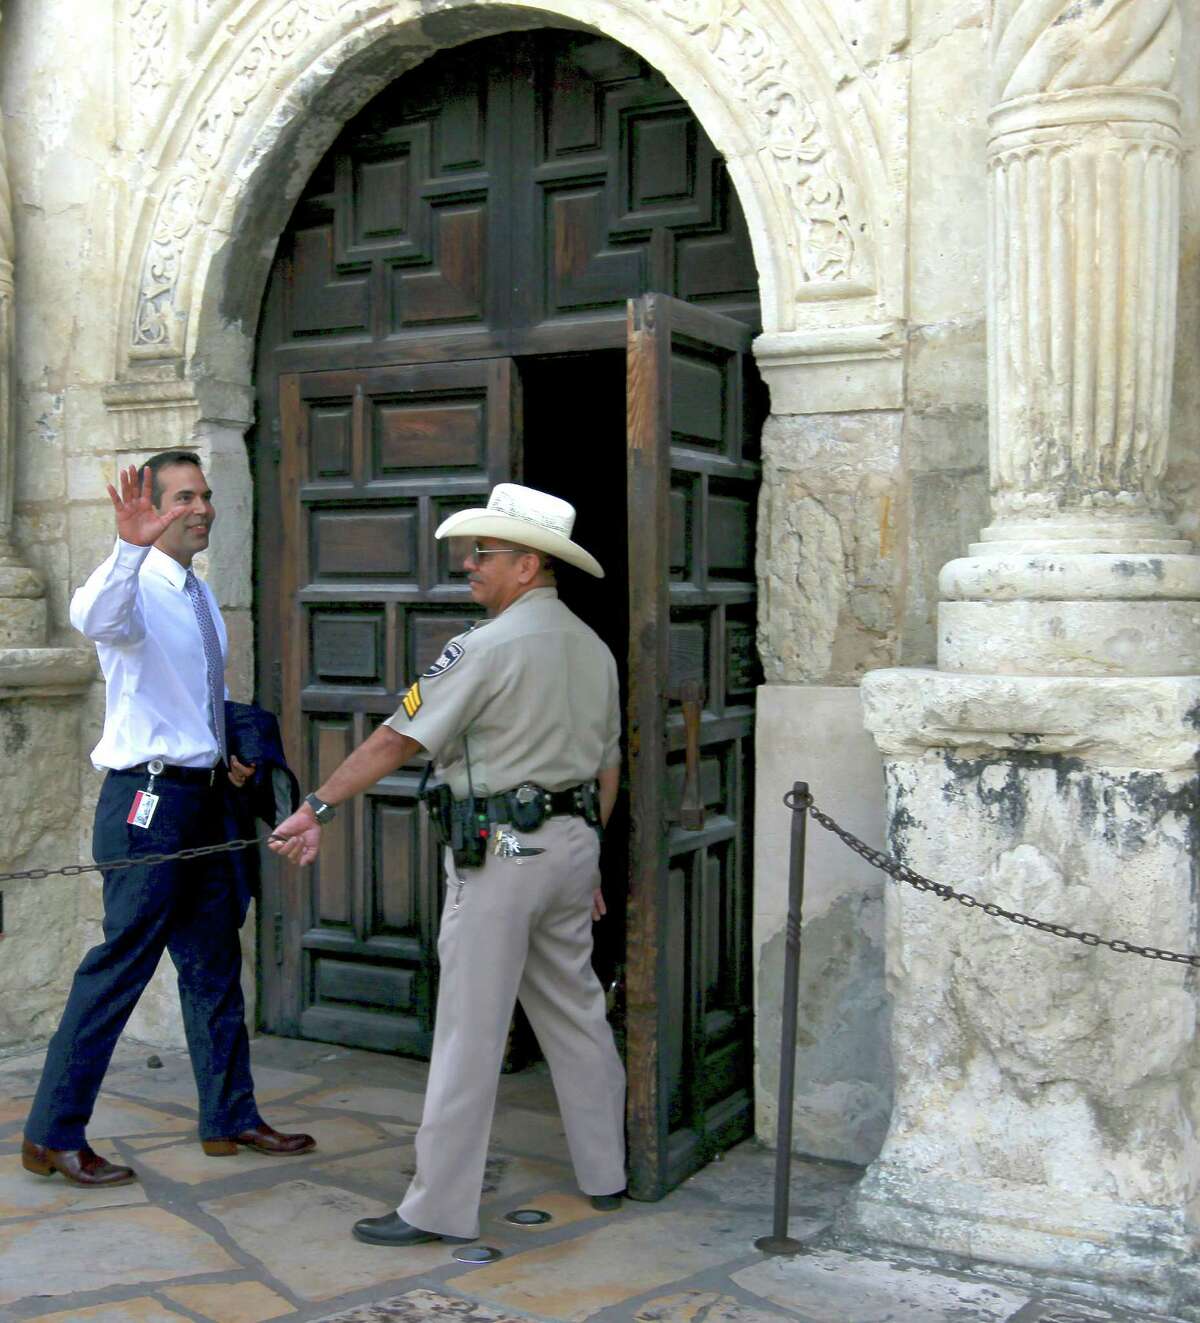 Texas Land Commissioner George P. Bush enters the Alamo Wednesday Sept. 2, 2015 while on a tour of the Alamo grounds. Bush was in San Antonio to celebrate the $31.5 million the General Land Office received to help preserve and develop the Alamo.